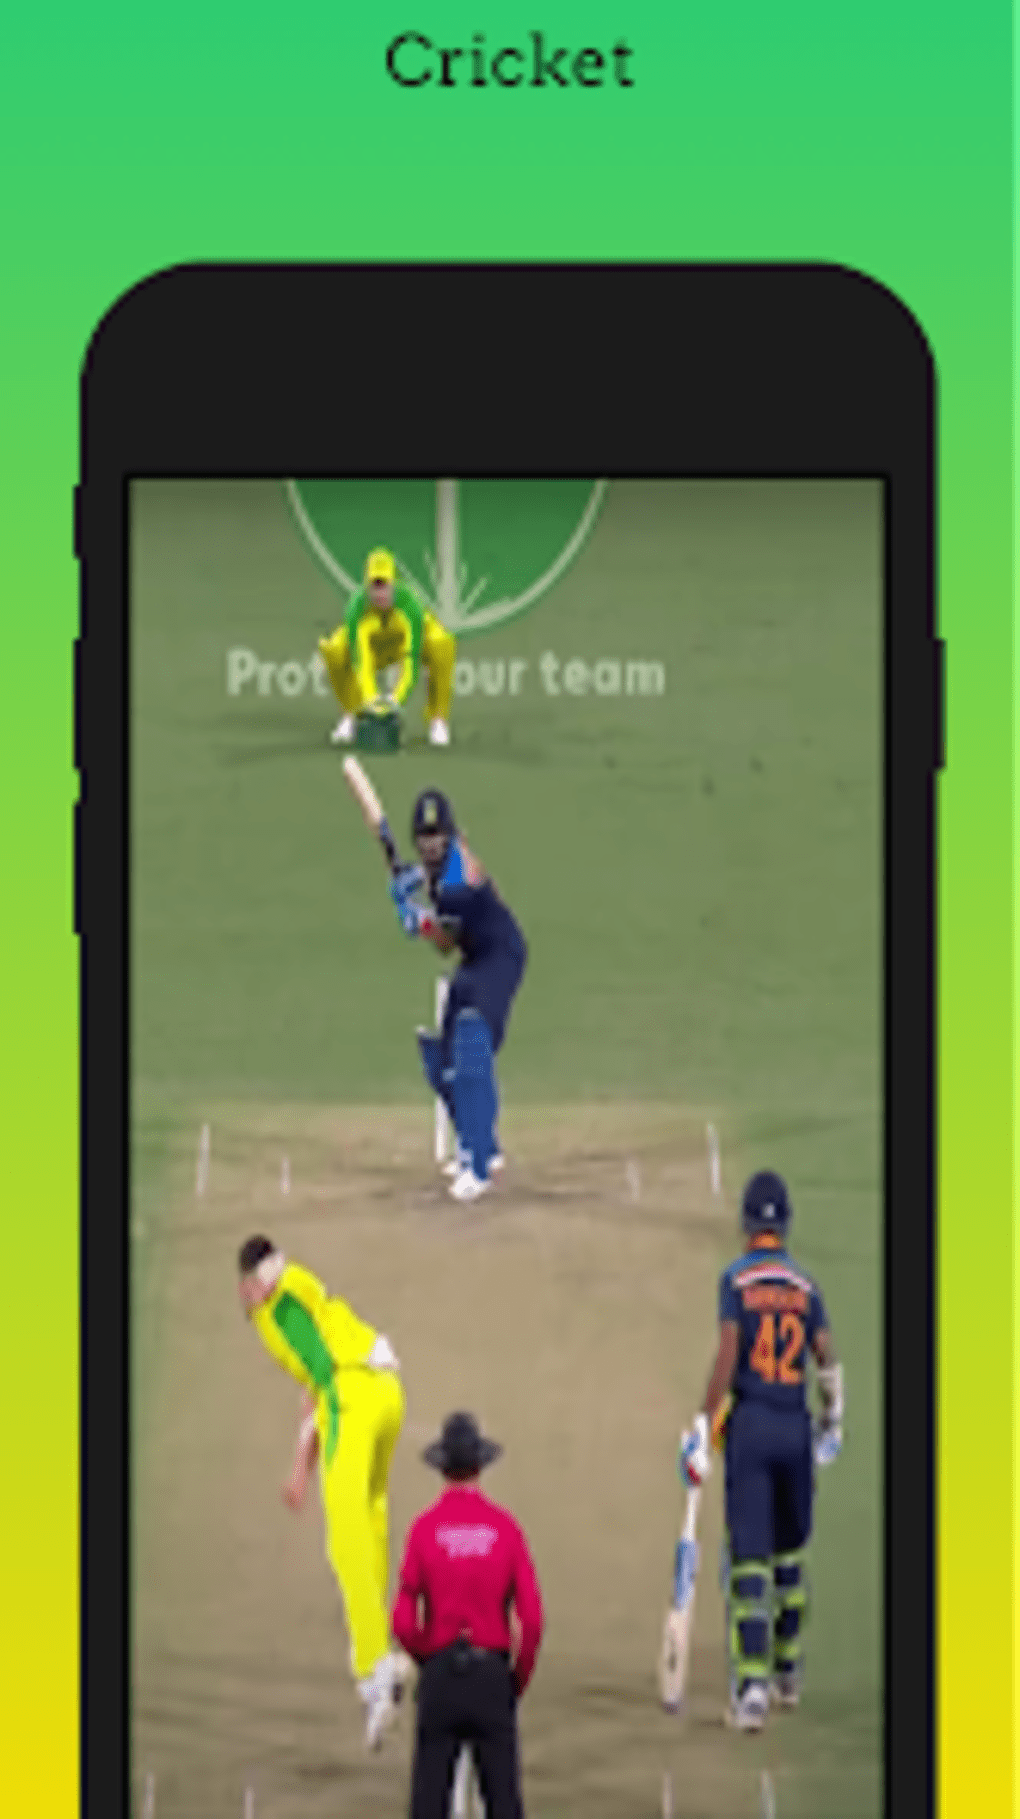 watch live cricket on mobile phone